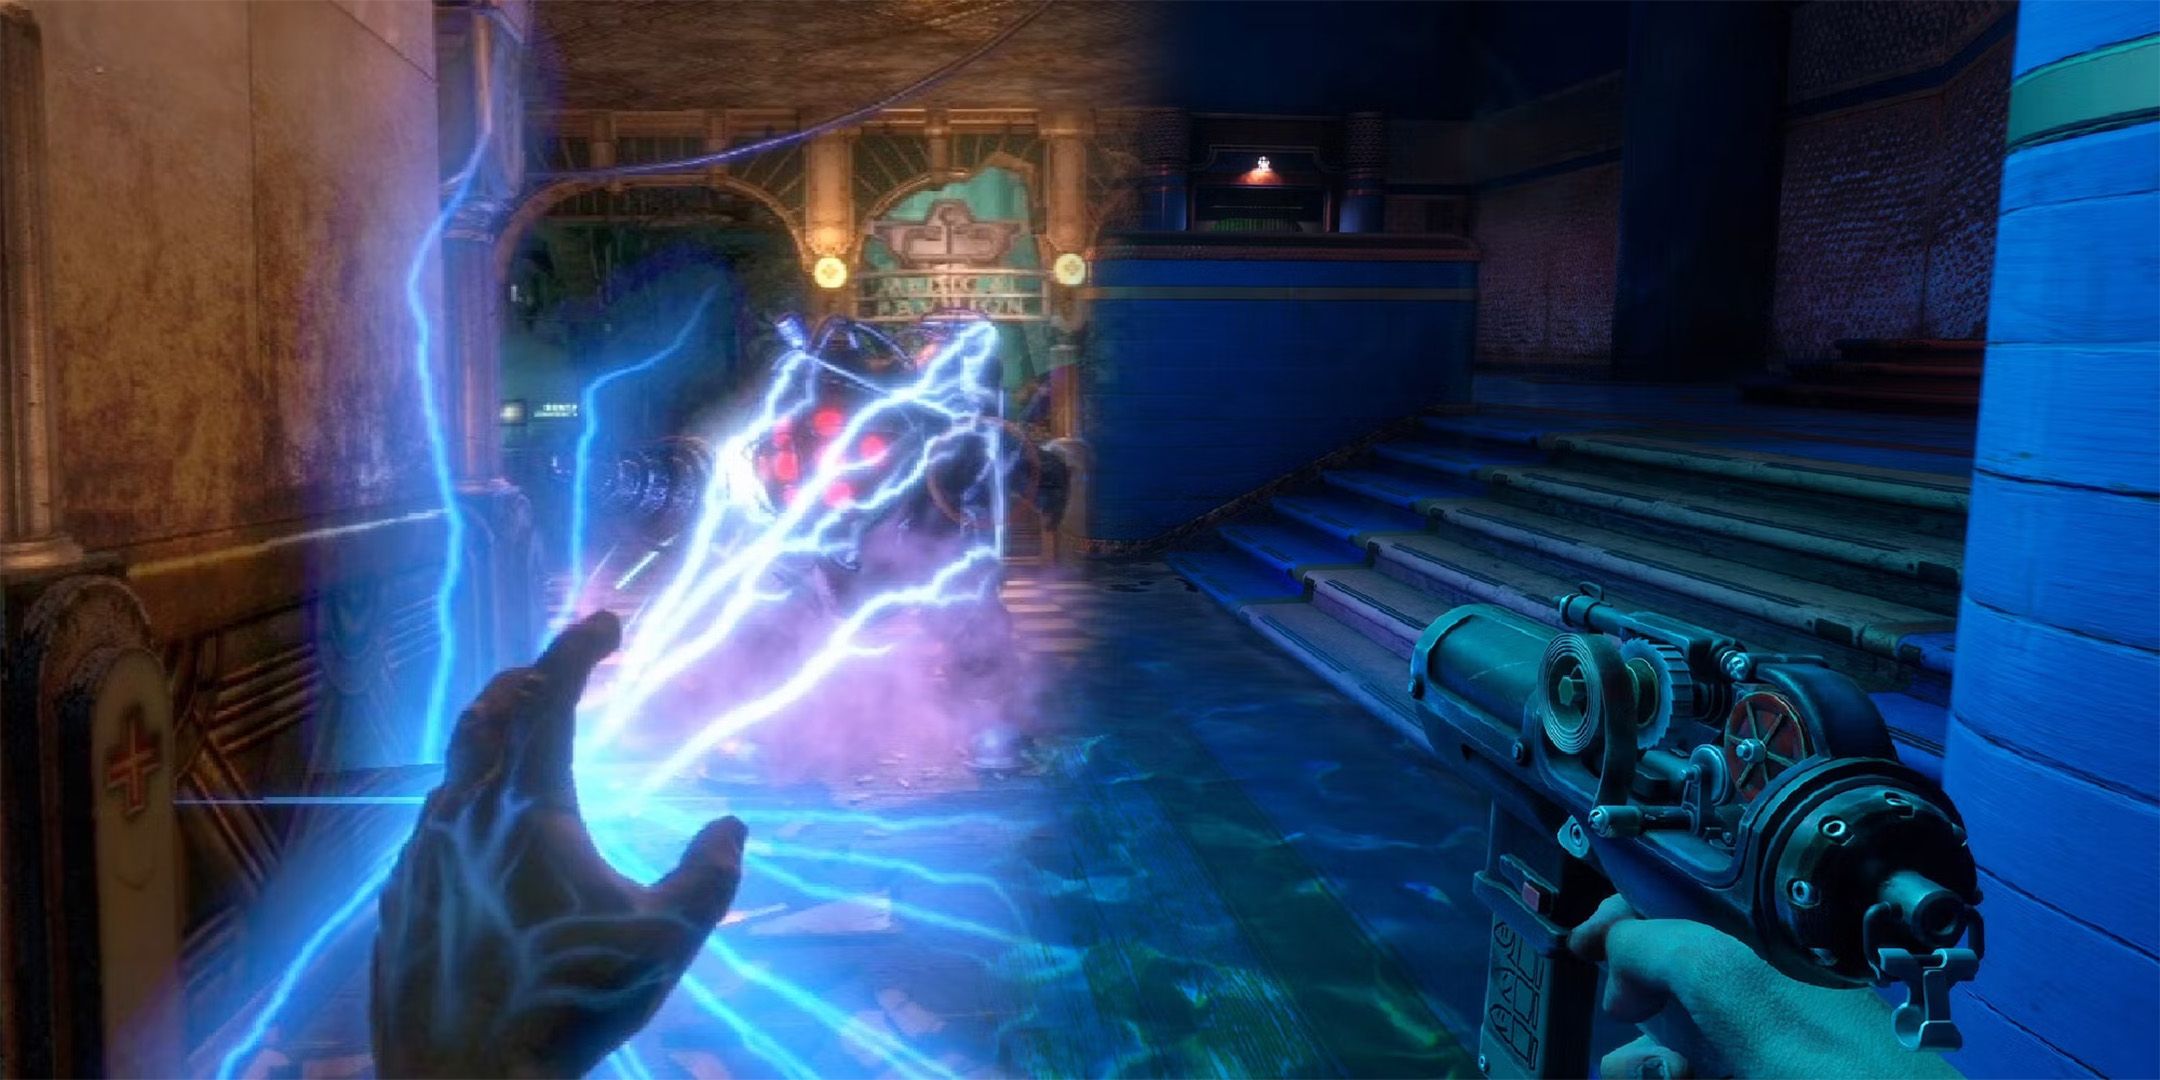 An electric attack used against a Big Daddy in Bioshock.